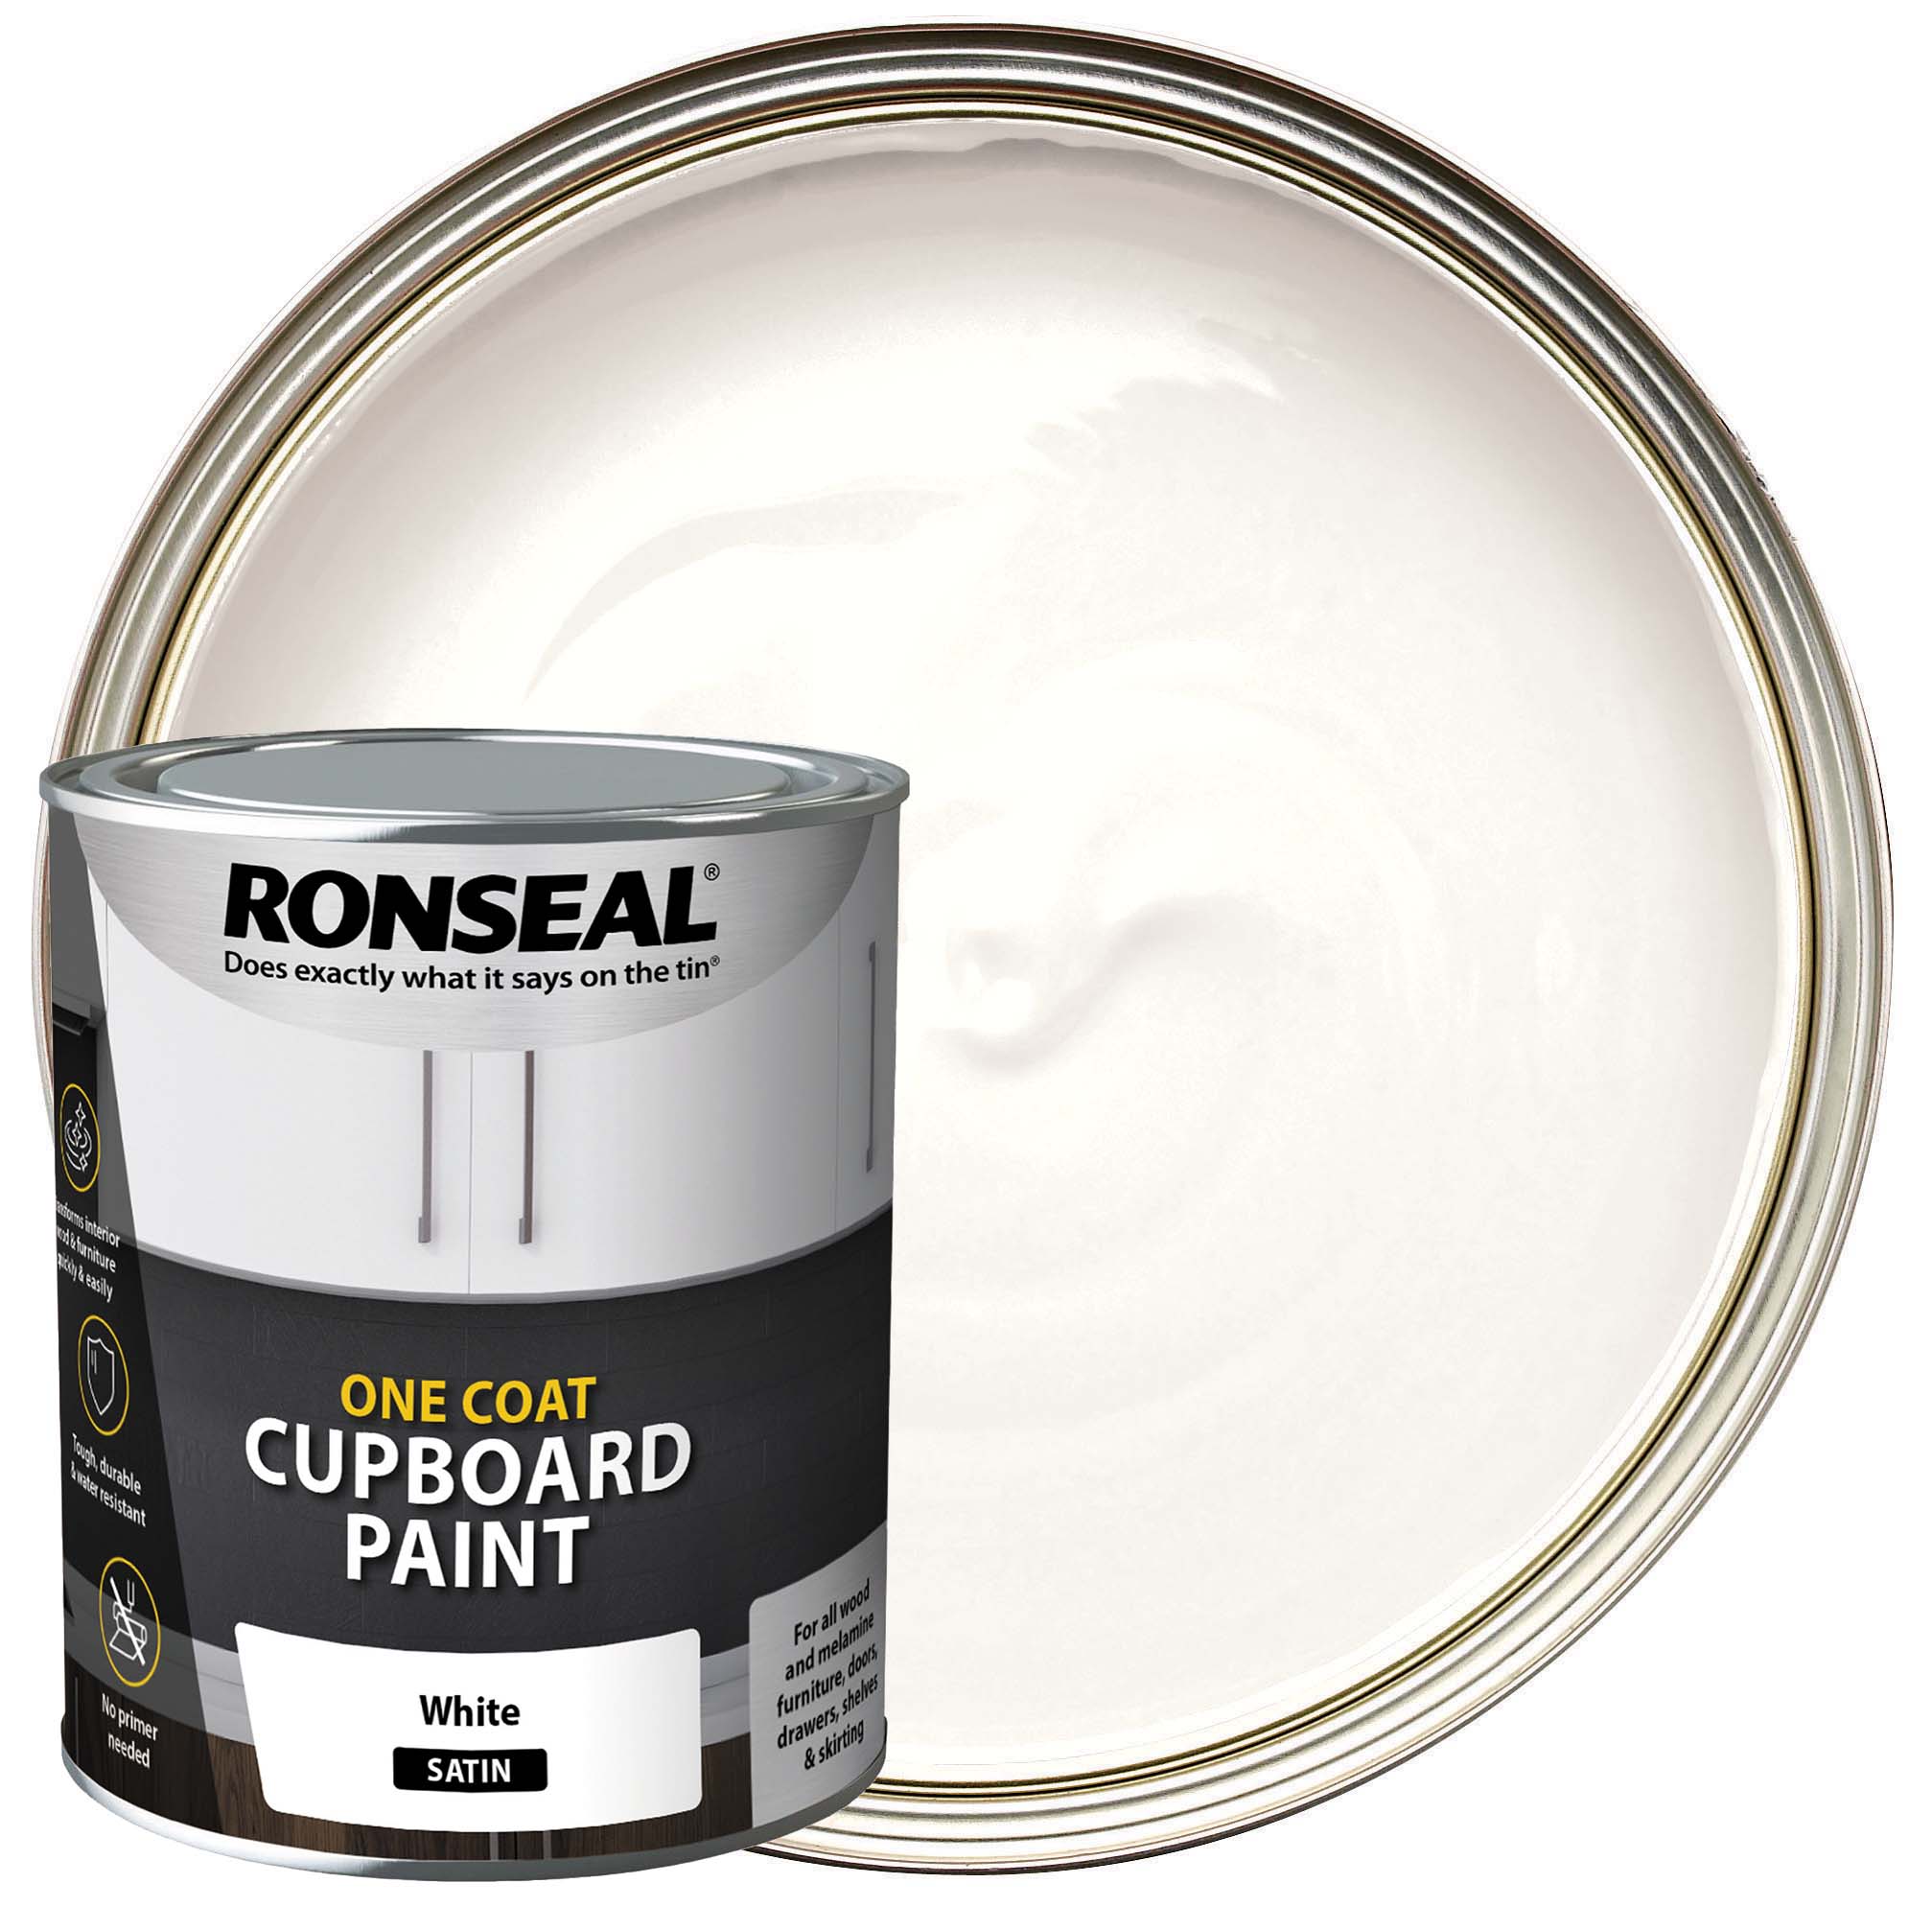 Image of Ronseal One Coat Cupboard & Melamine Paint - White Satin 750ml